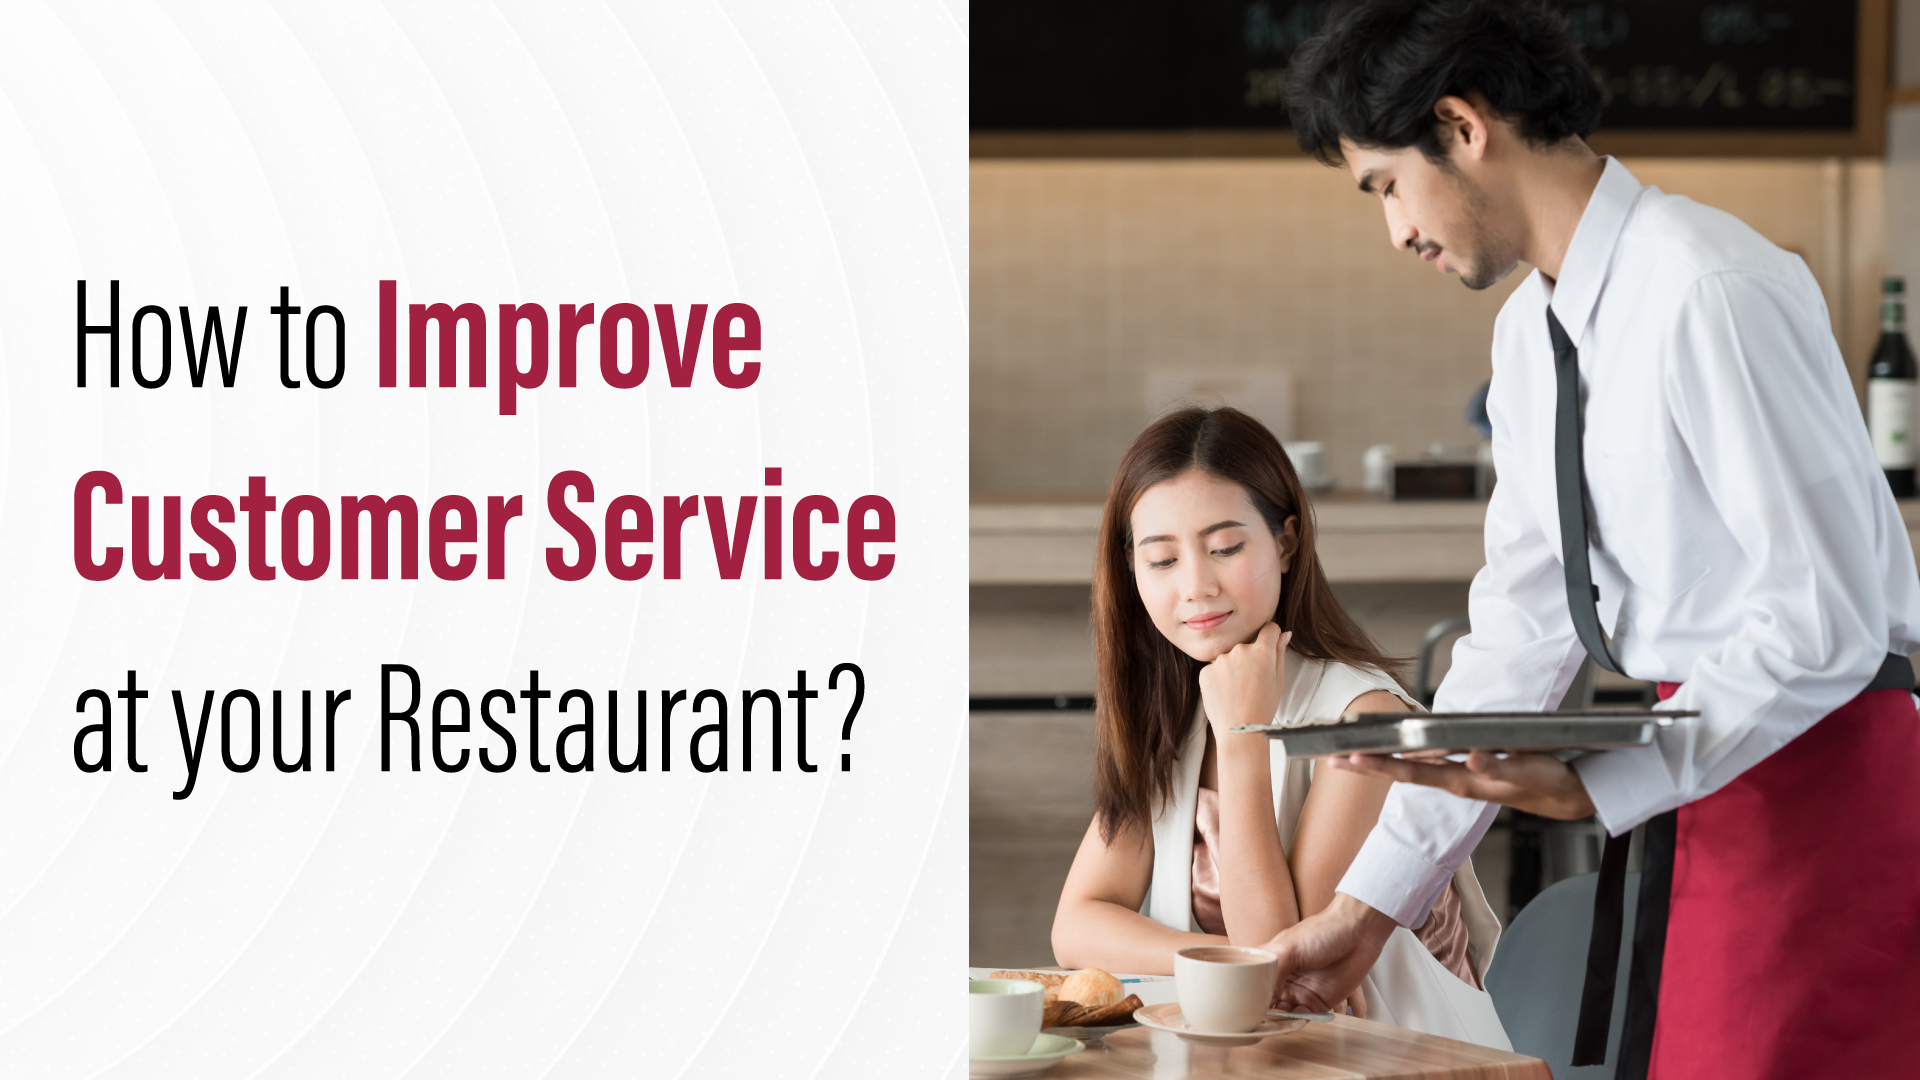 QPOS-How to Improve Customer Service at your Restaurant?